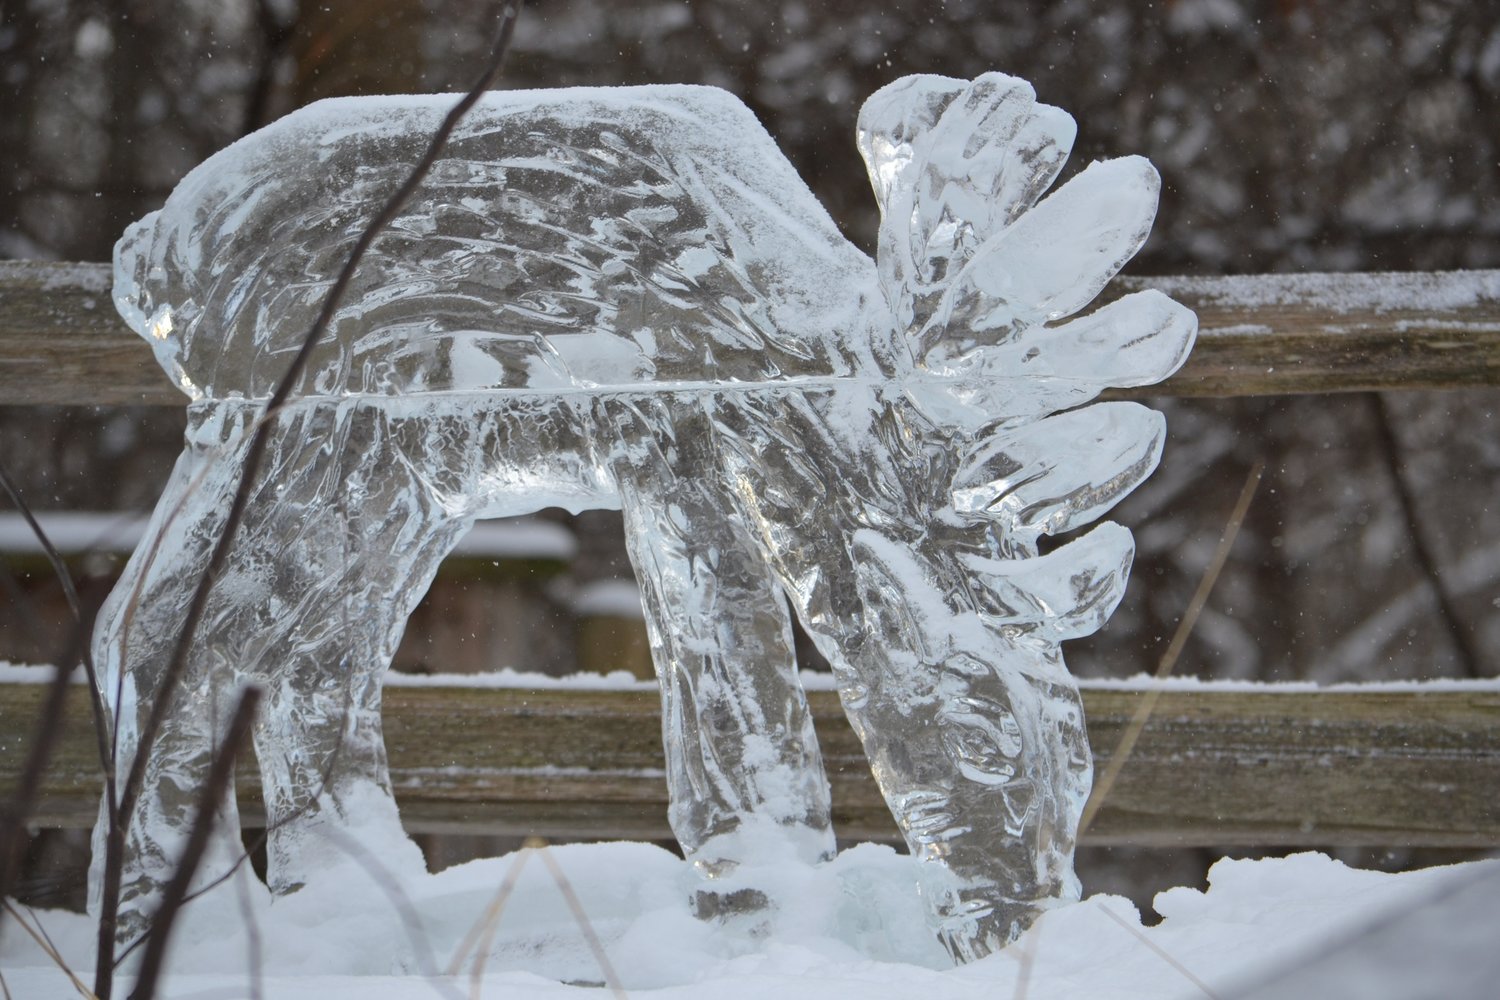 Visit Potter Park Zoo 10 a.m. to 4 p.m. Saturday and Sunday for an Ice Safari with pre-made ice carvings, live carvings and a chance to see winter-loving zoo animals.